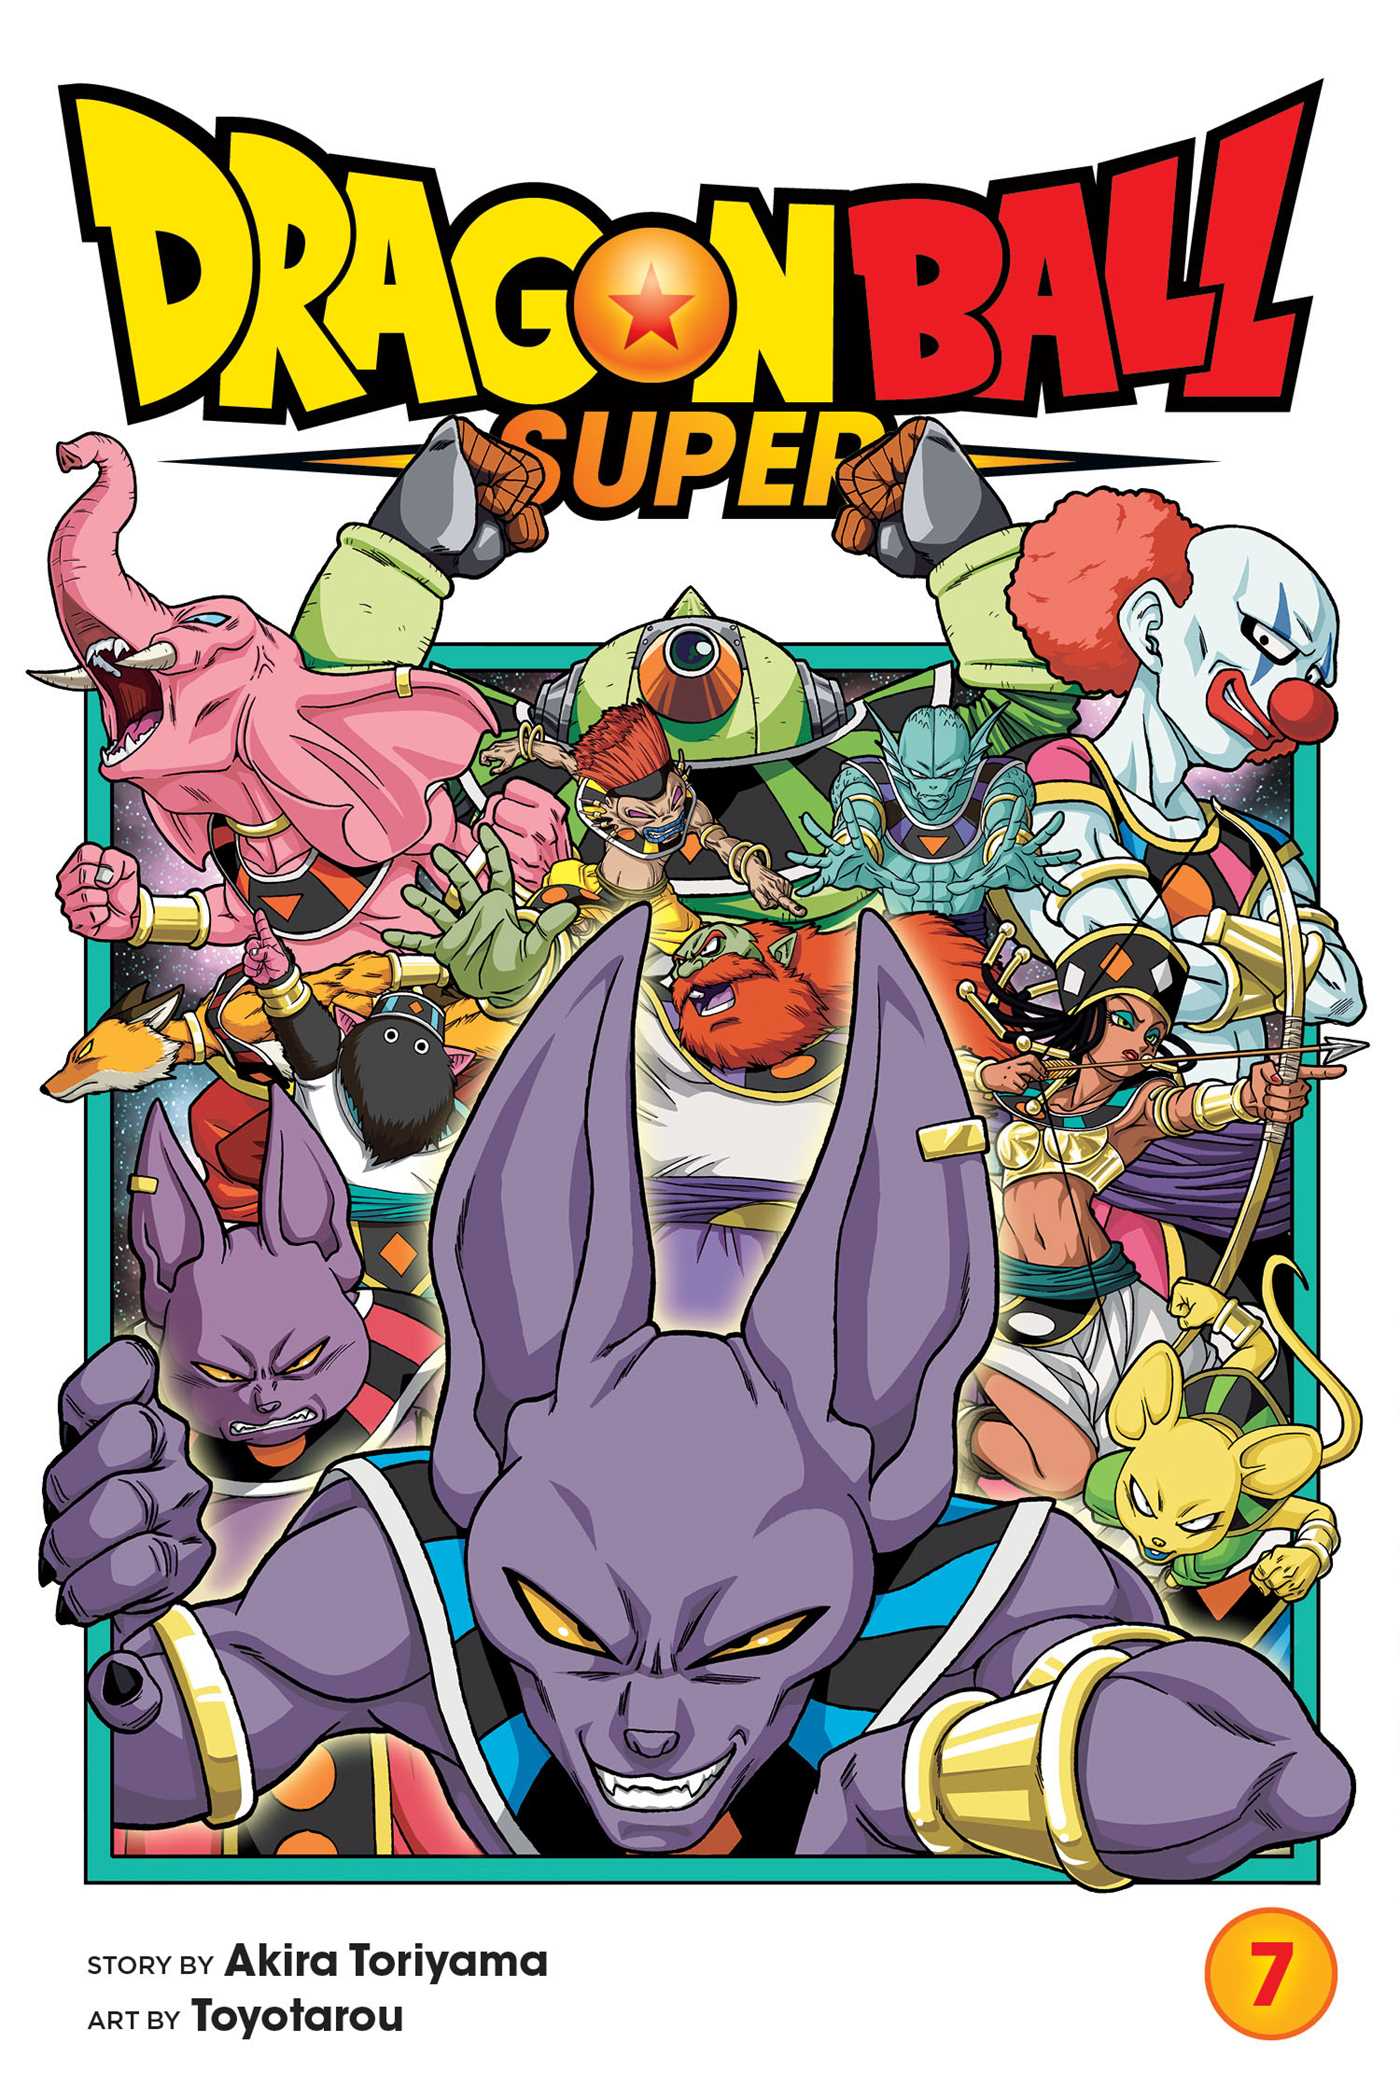 Universe Survival! The Tournament of Power Begins ...